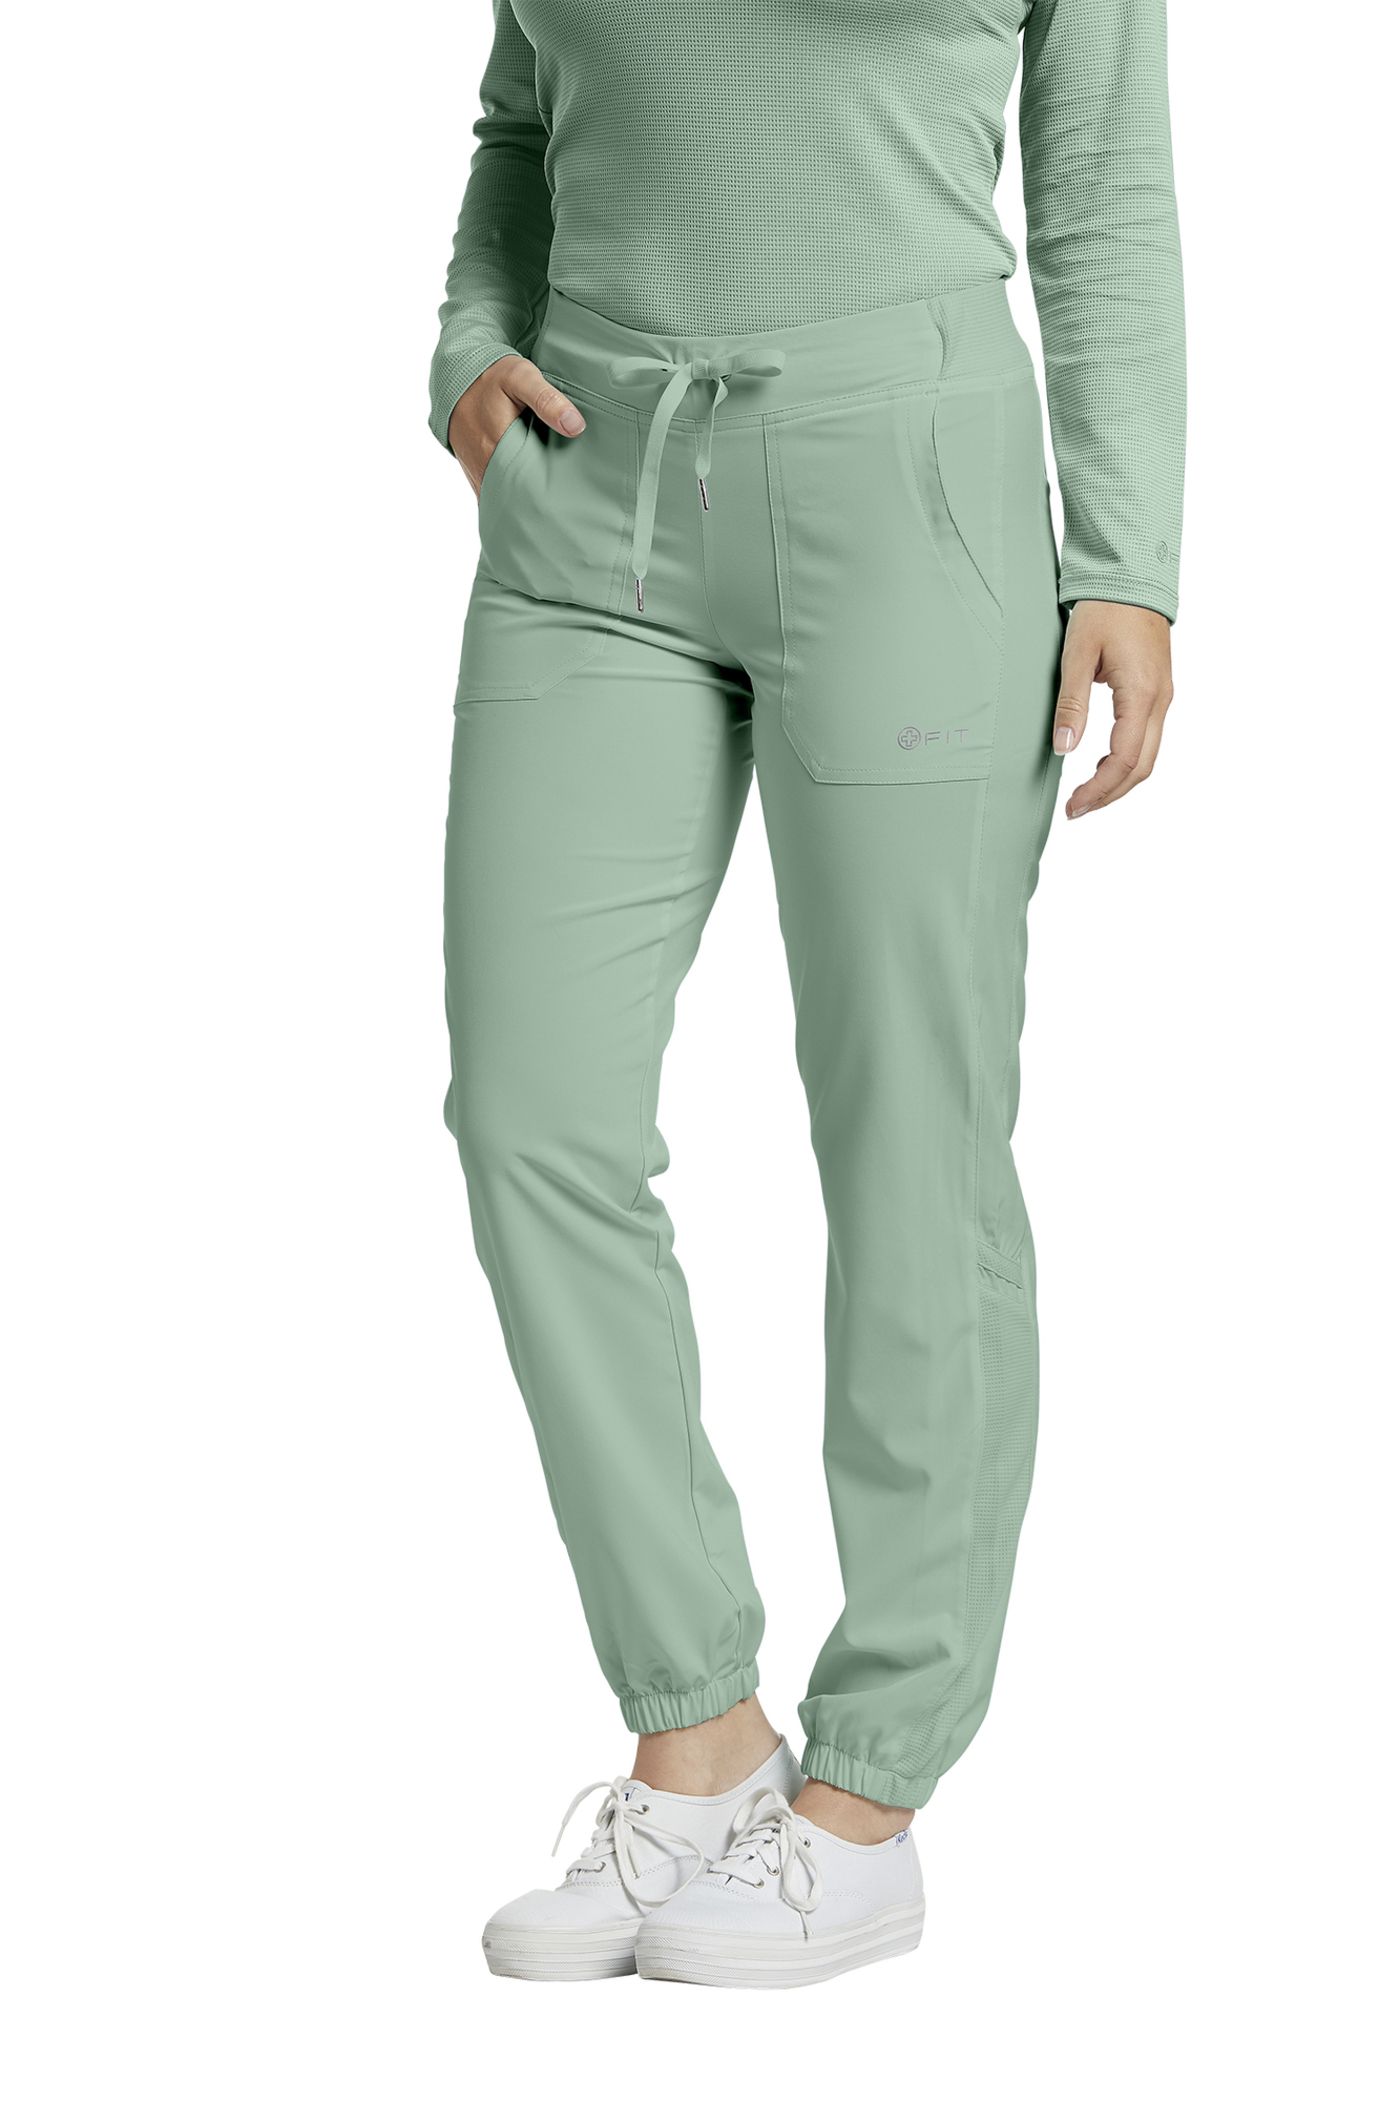 Buy/Shop Women's Pants Online in SC – The Scrub Connection